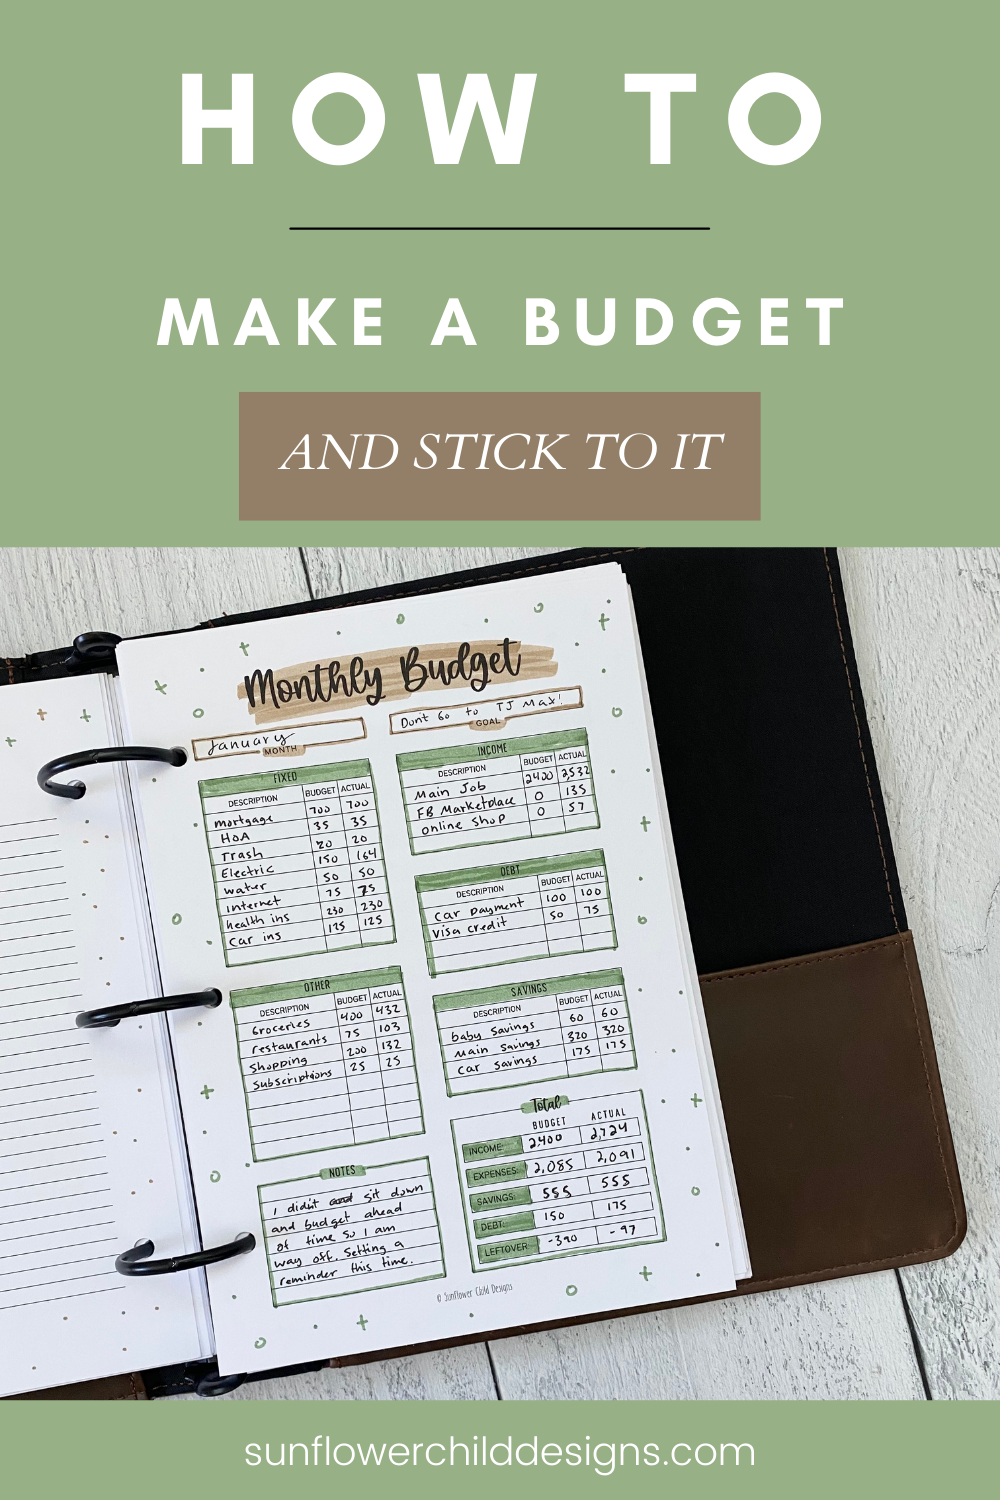 how-to-make-a-budget-7.png